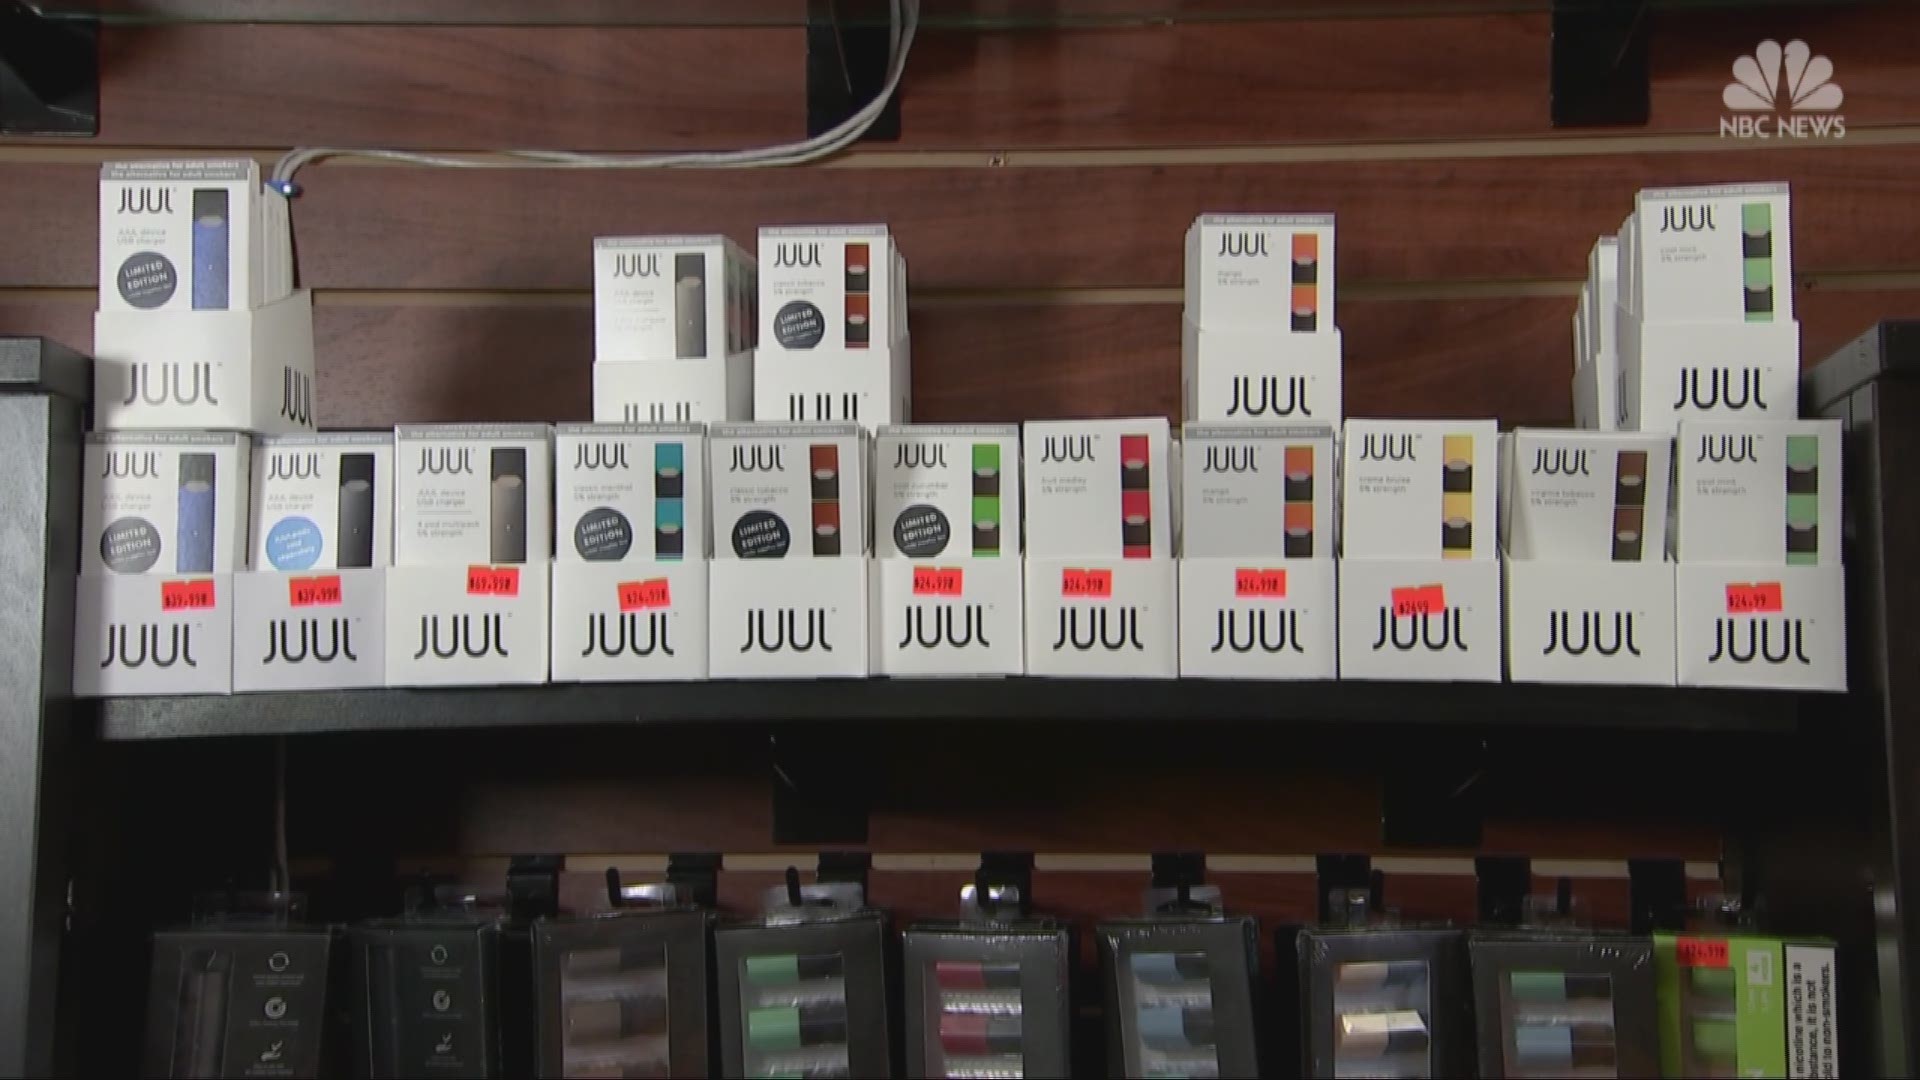 As part of the agreement, Juul Labs, Inc. will pay $14.5 million to the state and make changes to its corporate practices.